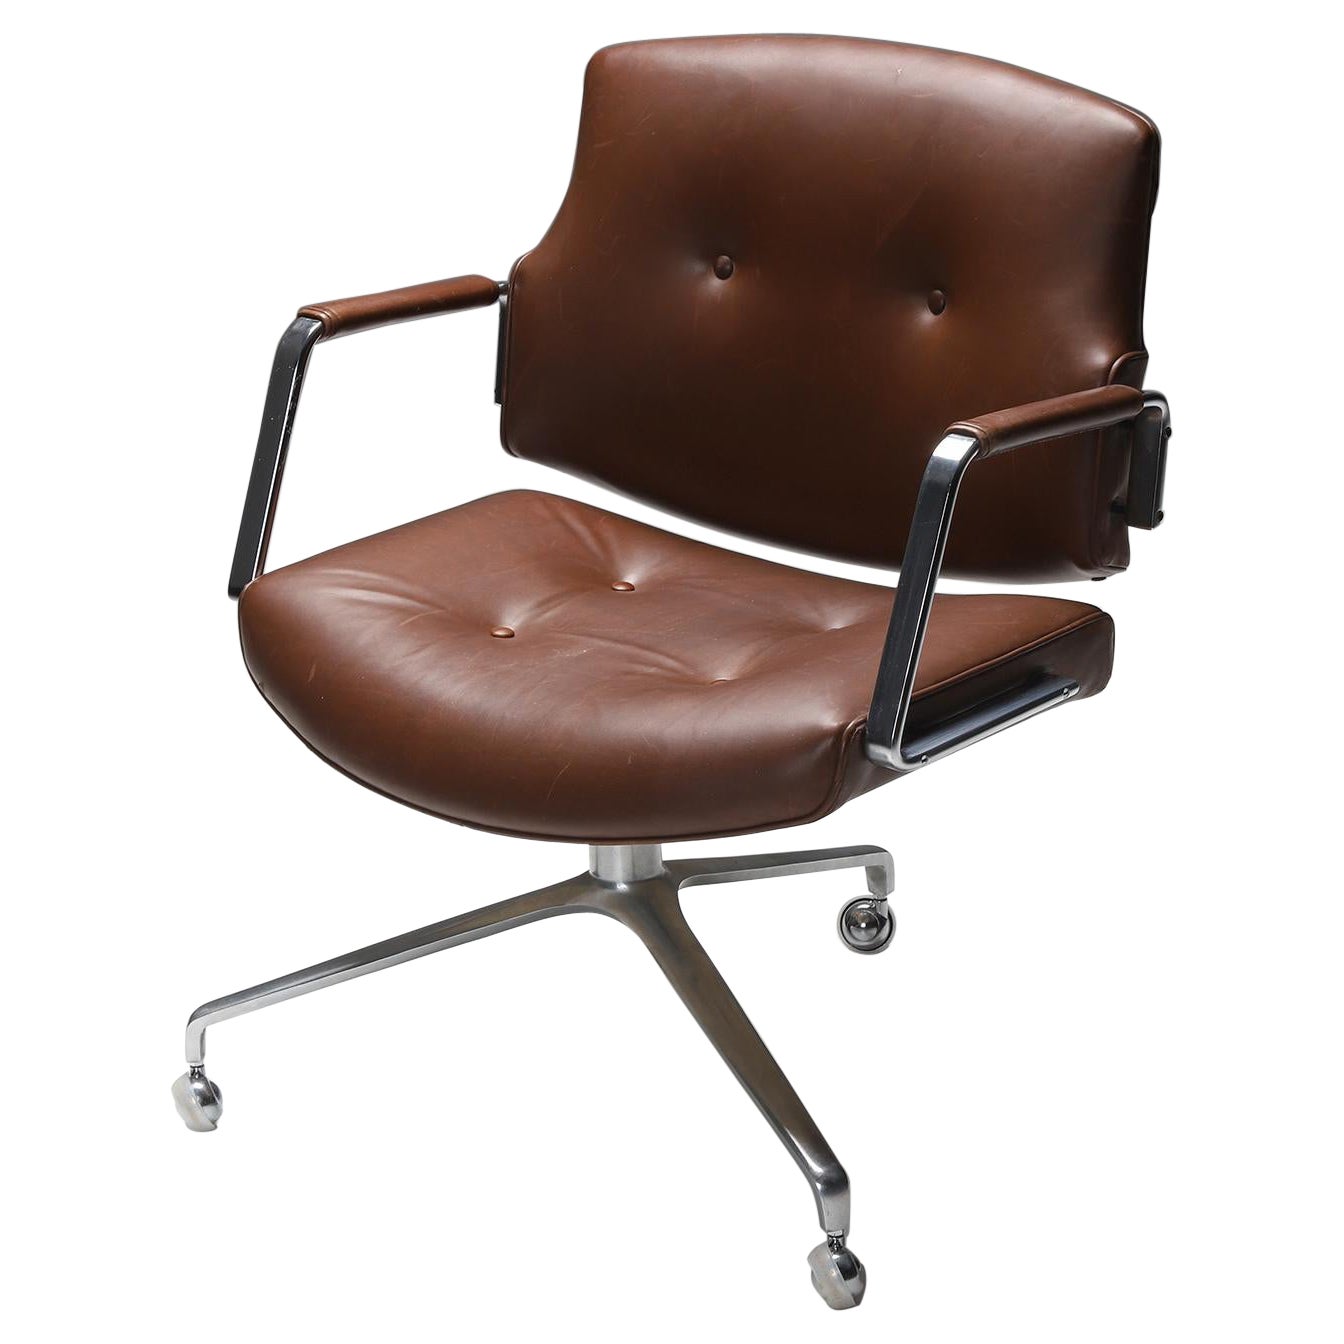 Fk84 Chocolatebrown Leather Office Chair by Preben Fabricius and Jorgen Kastholm